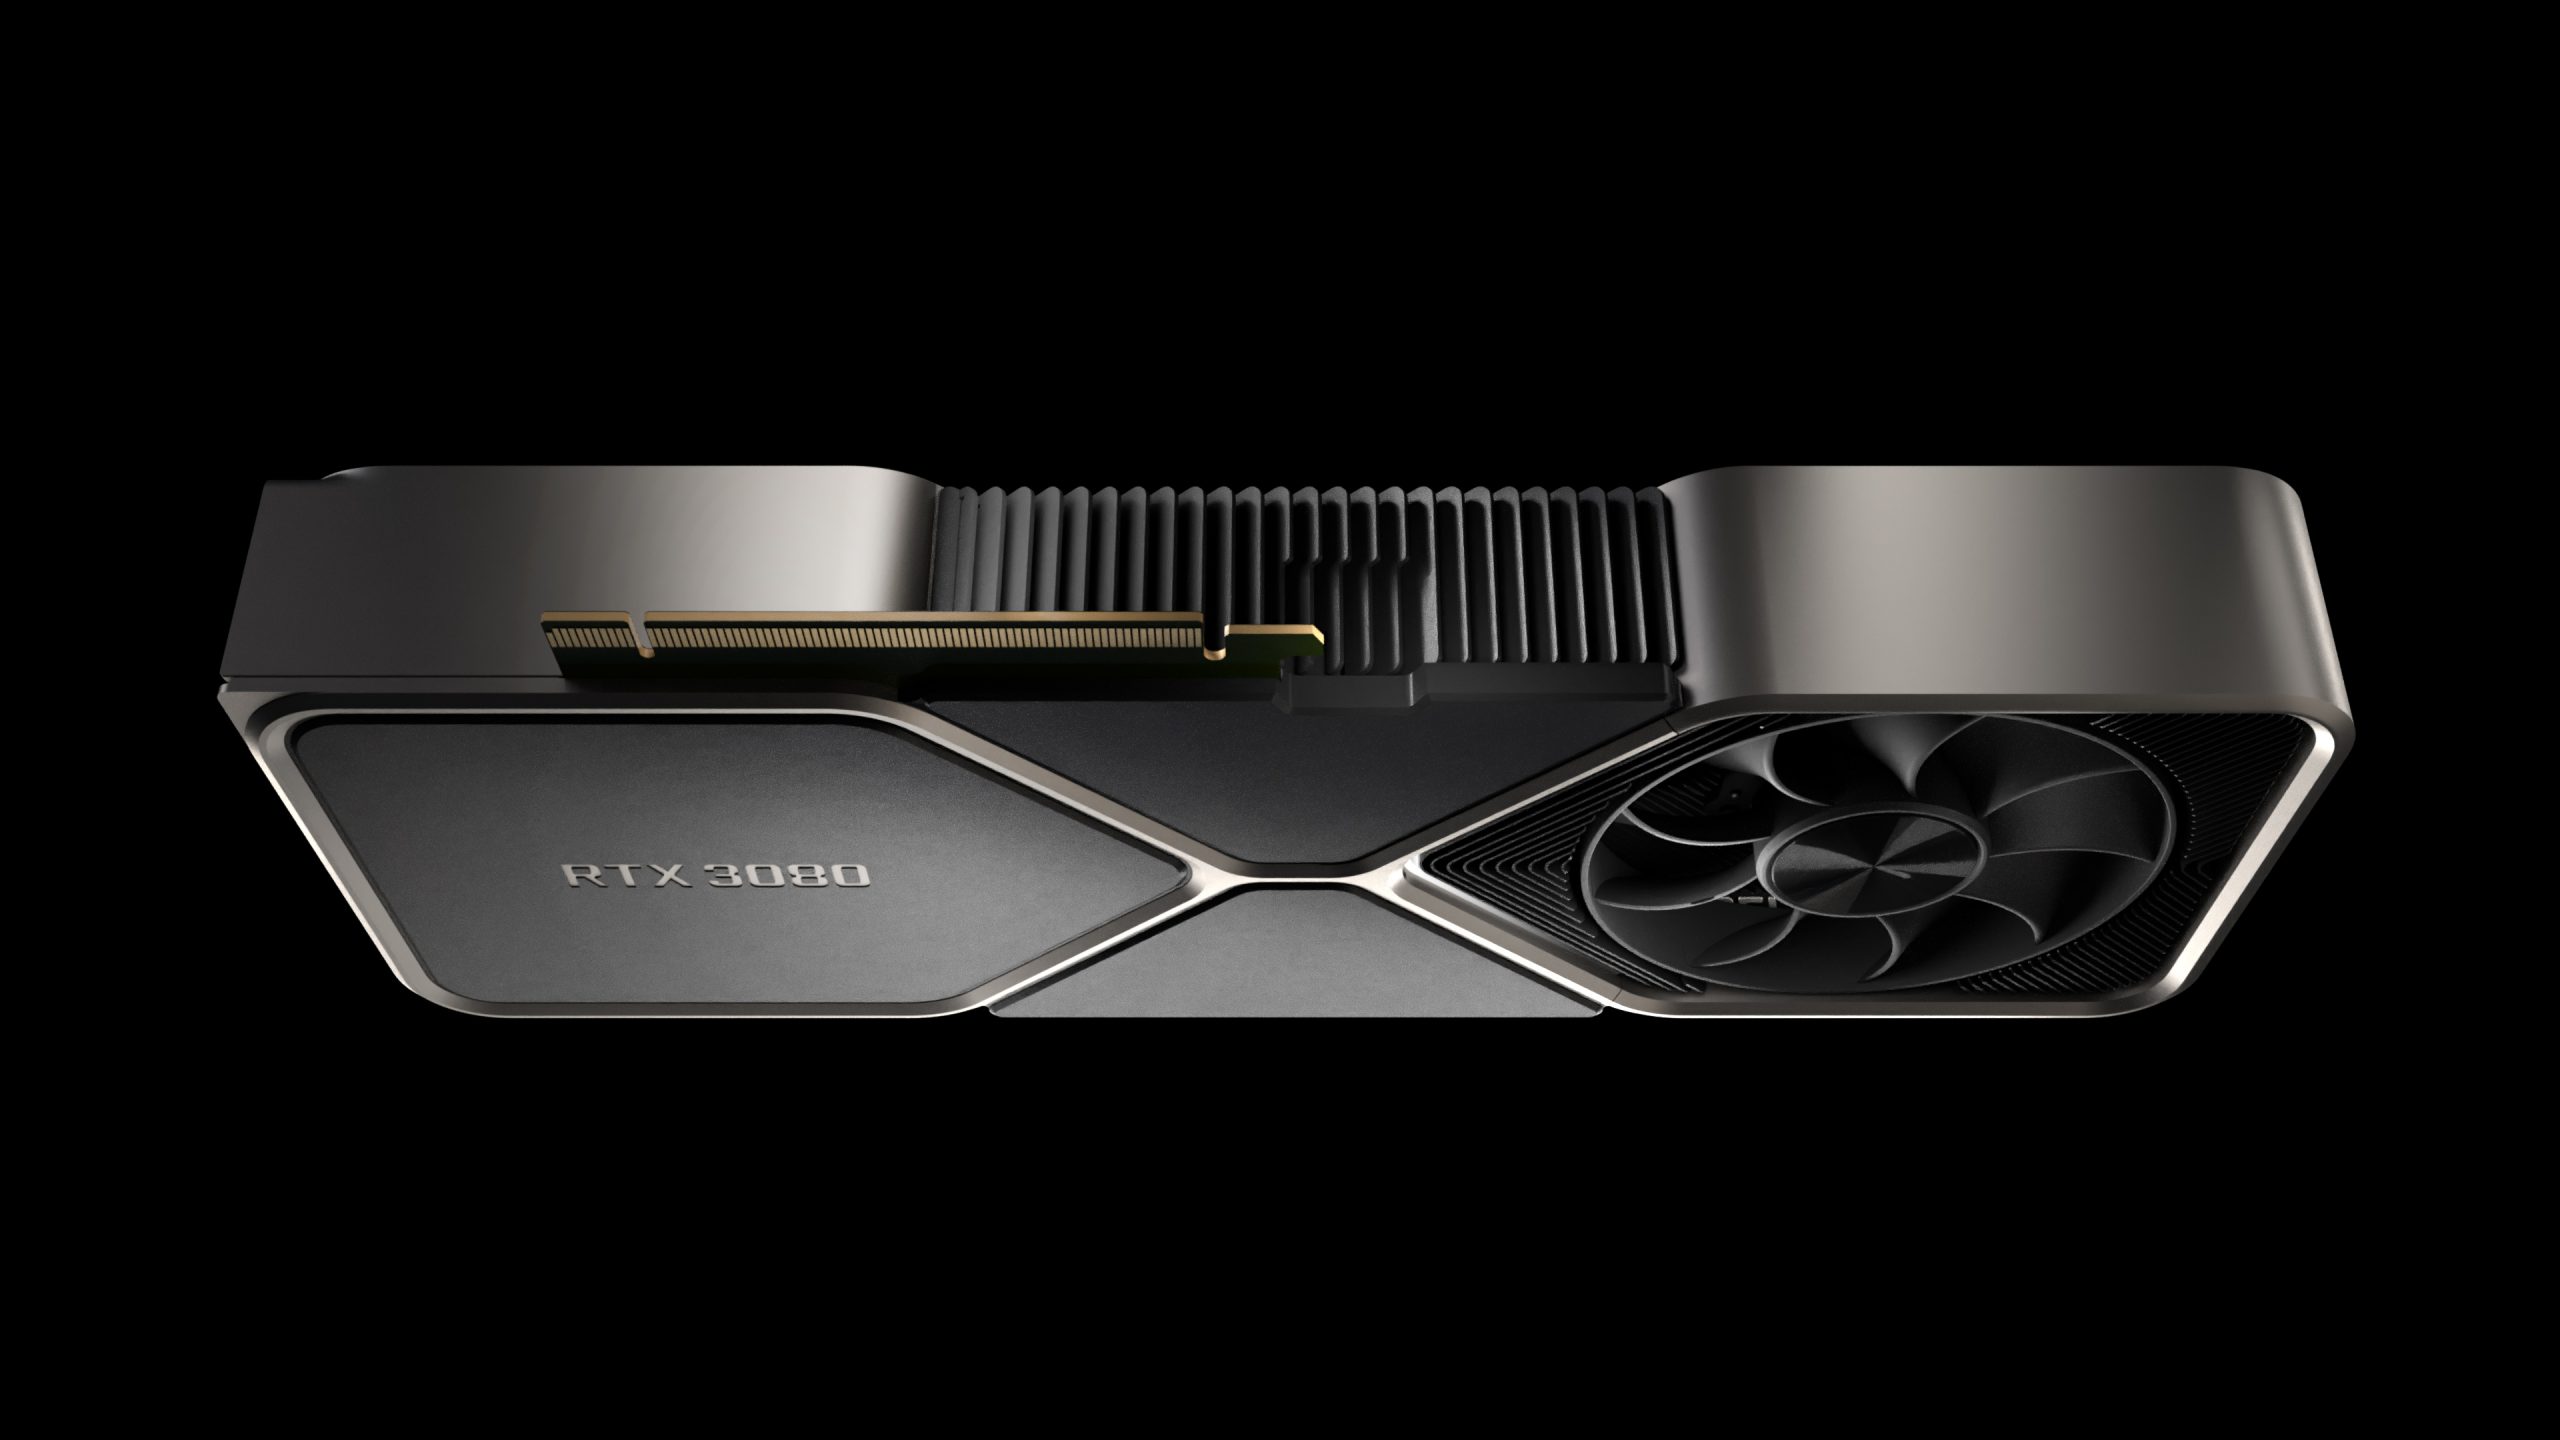 Upside down Nvidia Geforce RTX 3080 Founders Edition